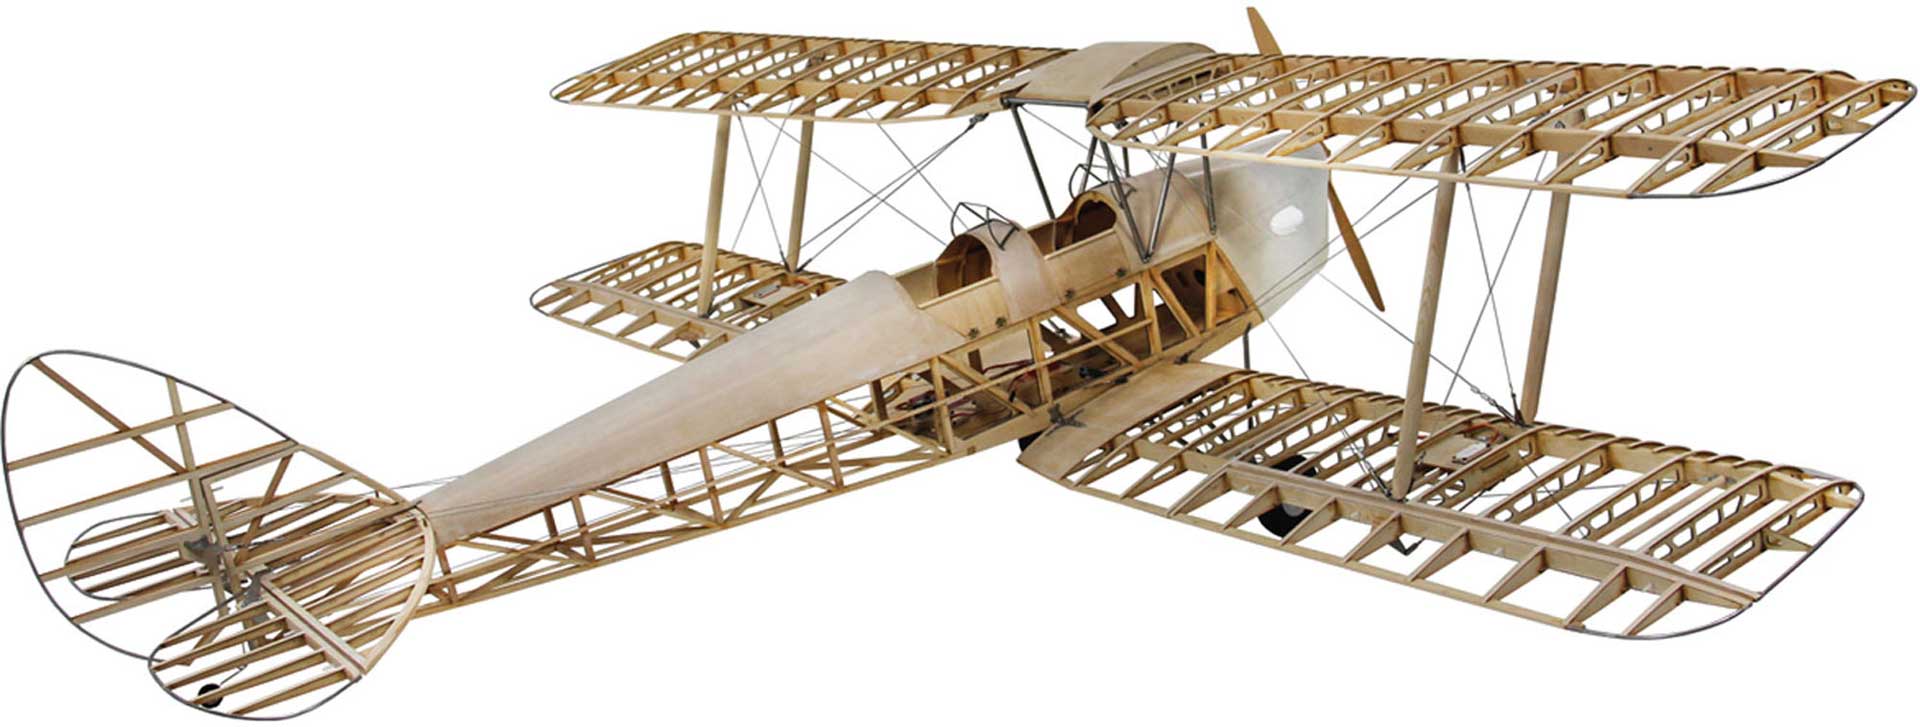 VALUEPLANES TIGER MOTH DEHAVILLAND DH82A WOODEN 1:3,8 2,36M WITH METAL FITTINGS AND GRP